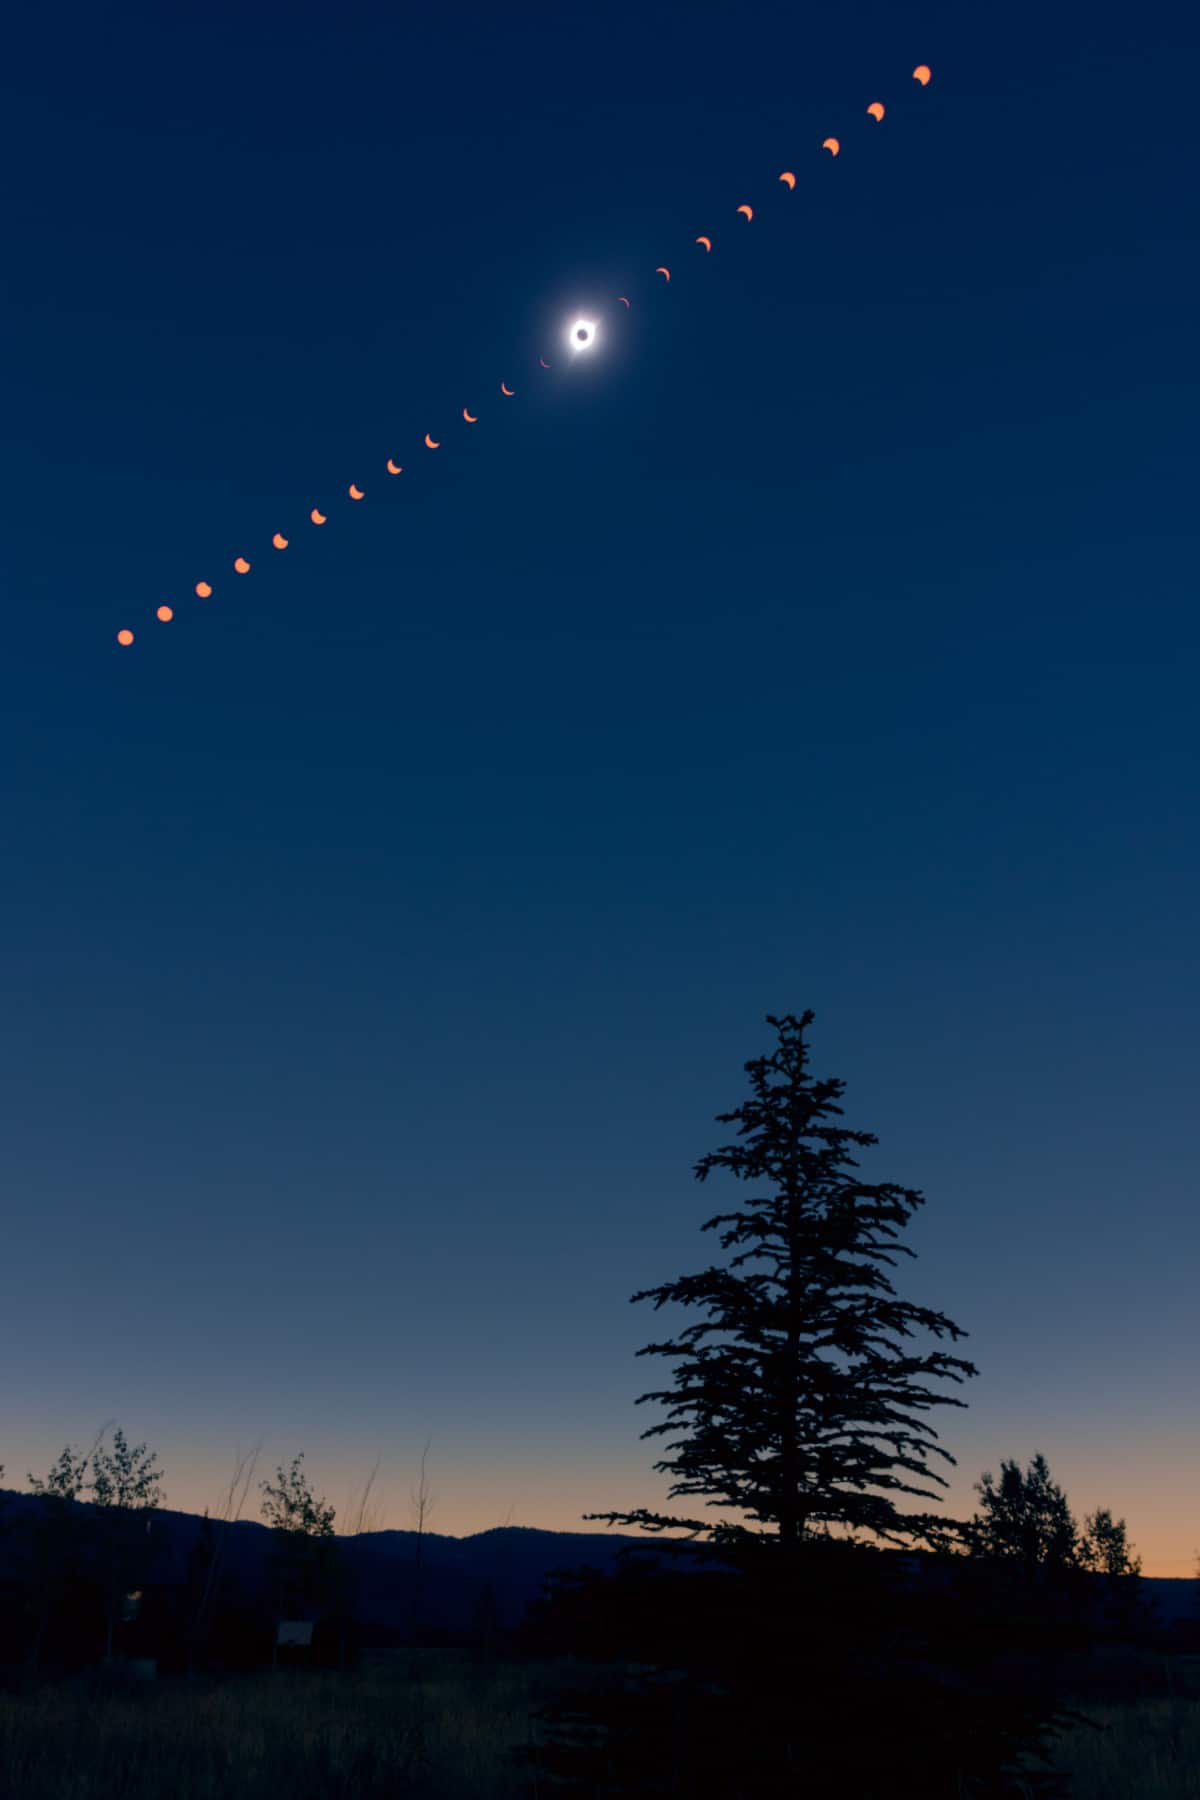 A pine tree stands alone with a solar eclipse progression illustrated in the sky above. 